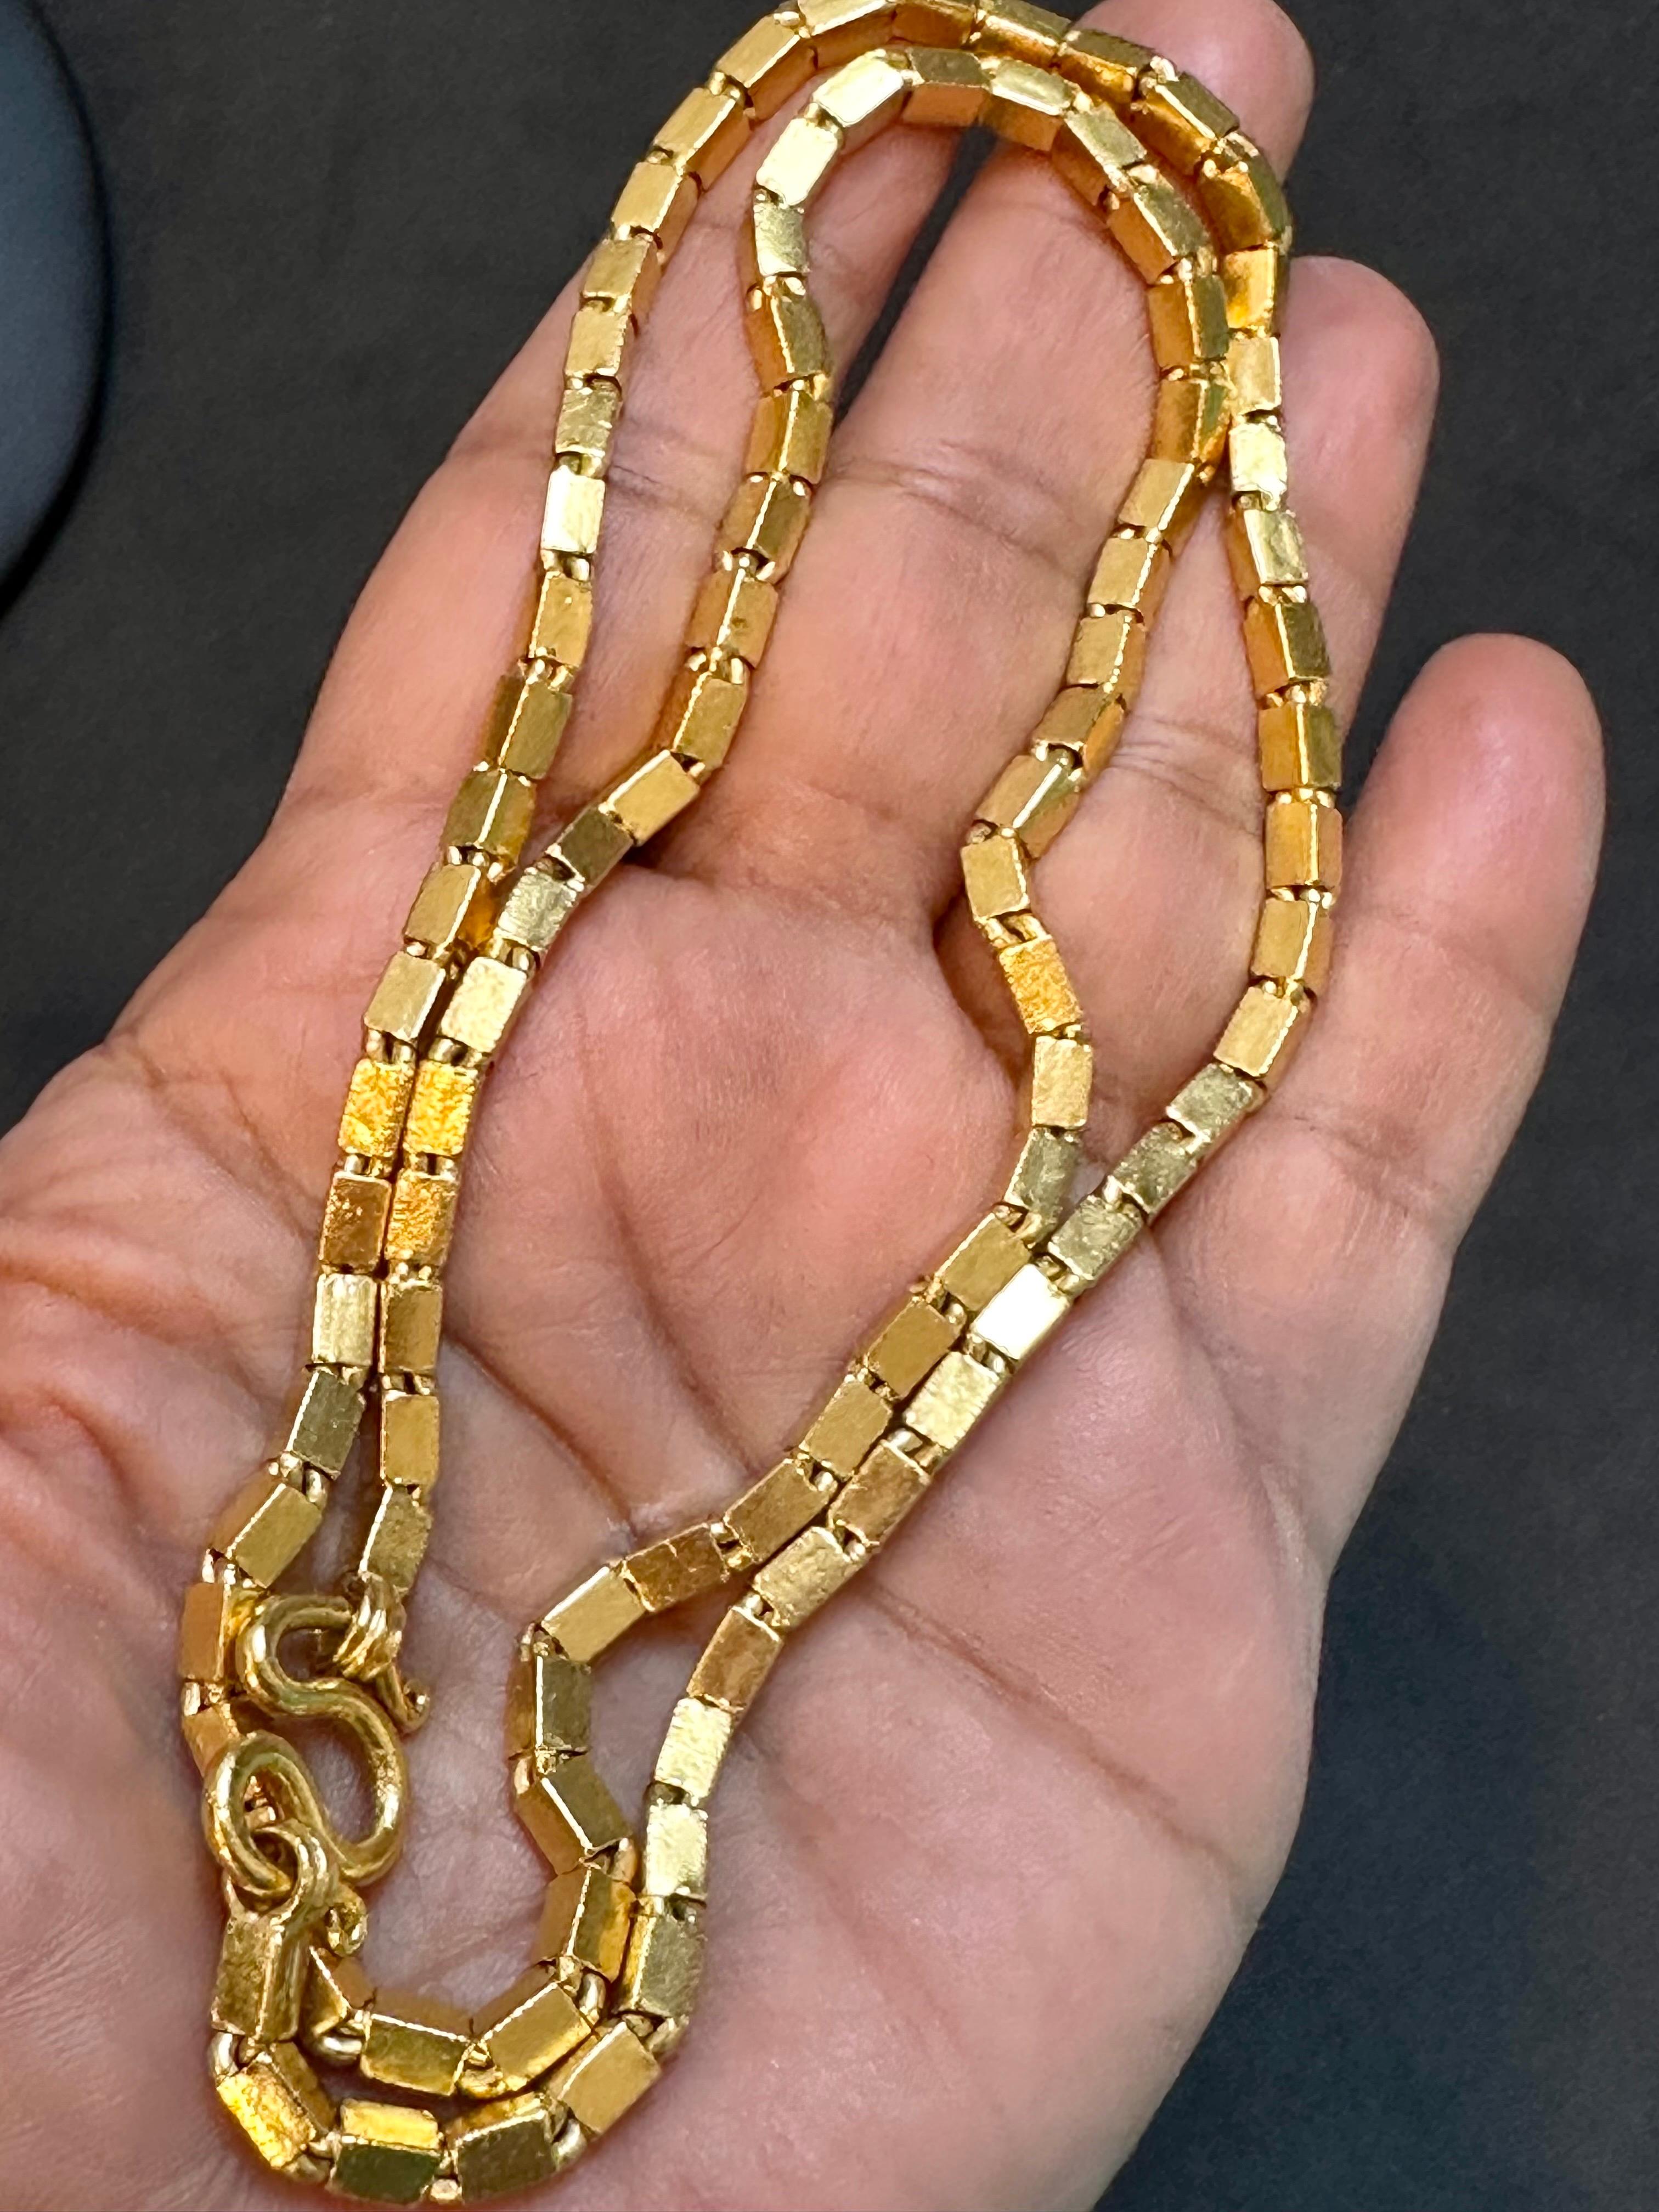 2 ounce gold chain